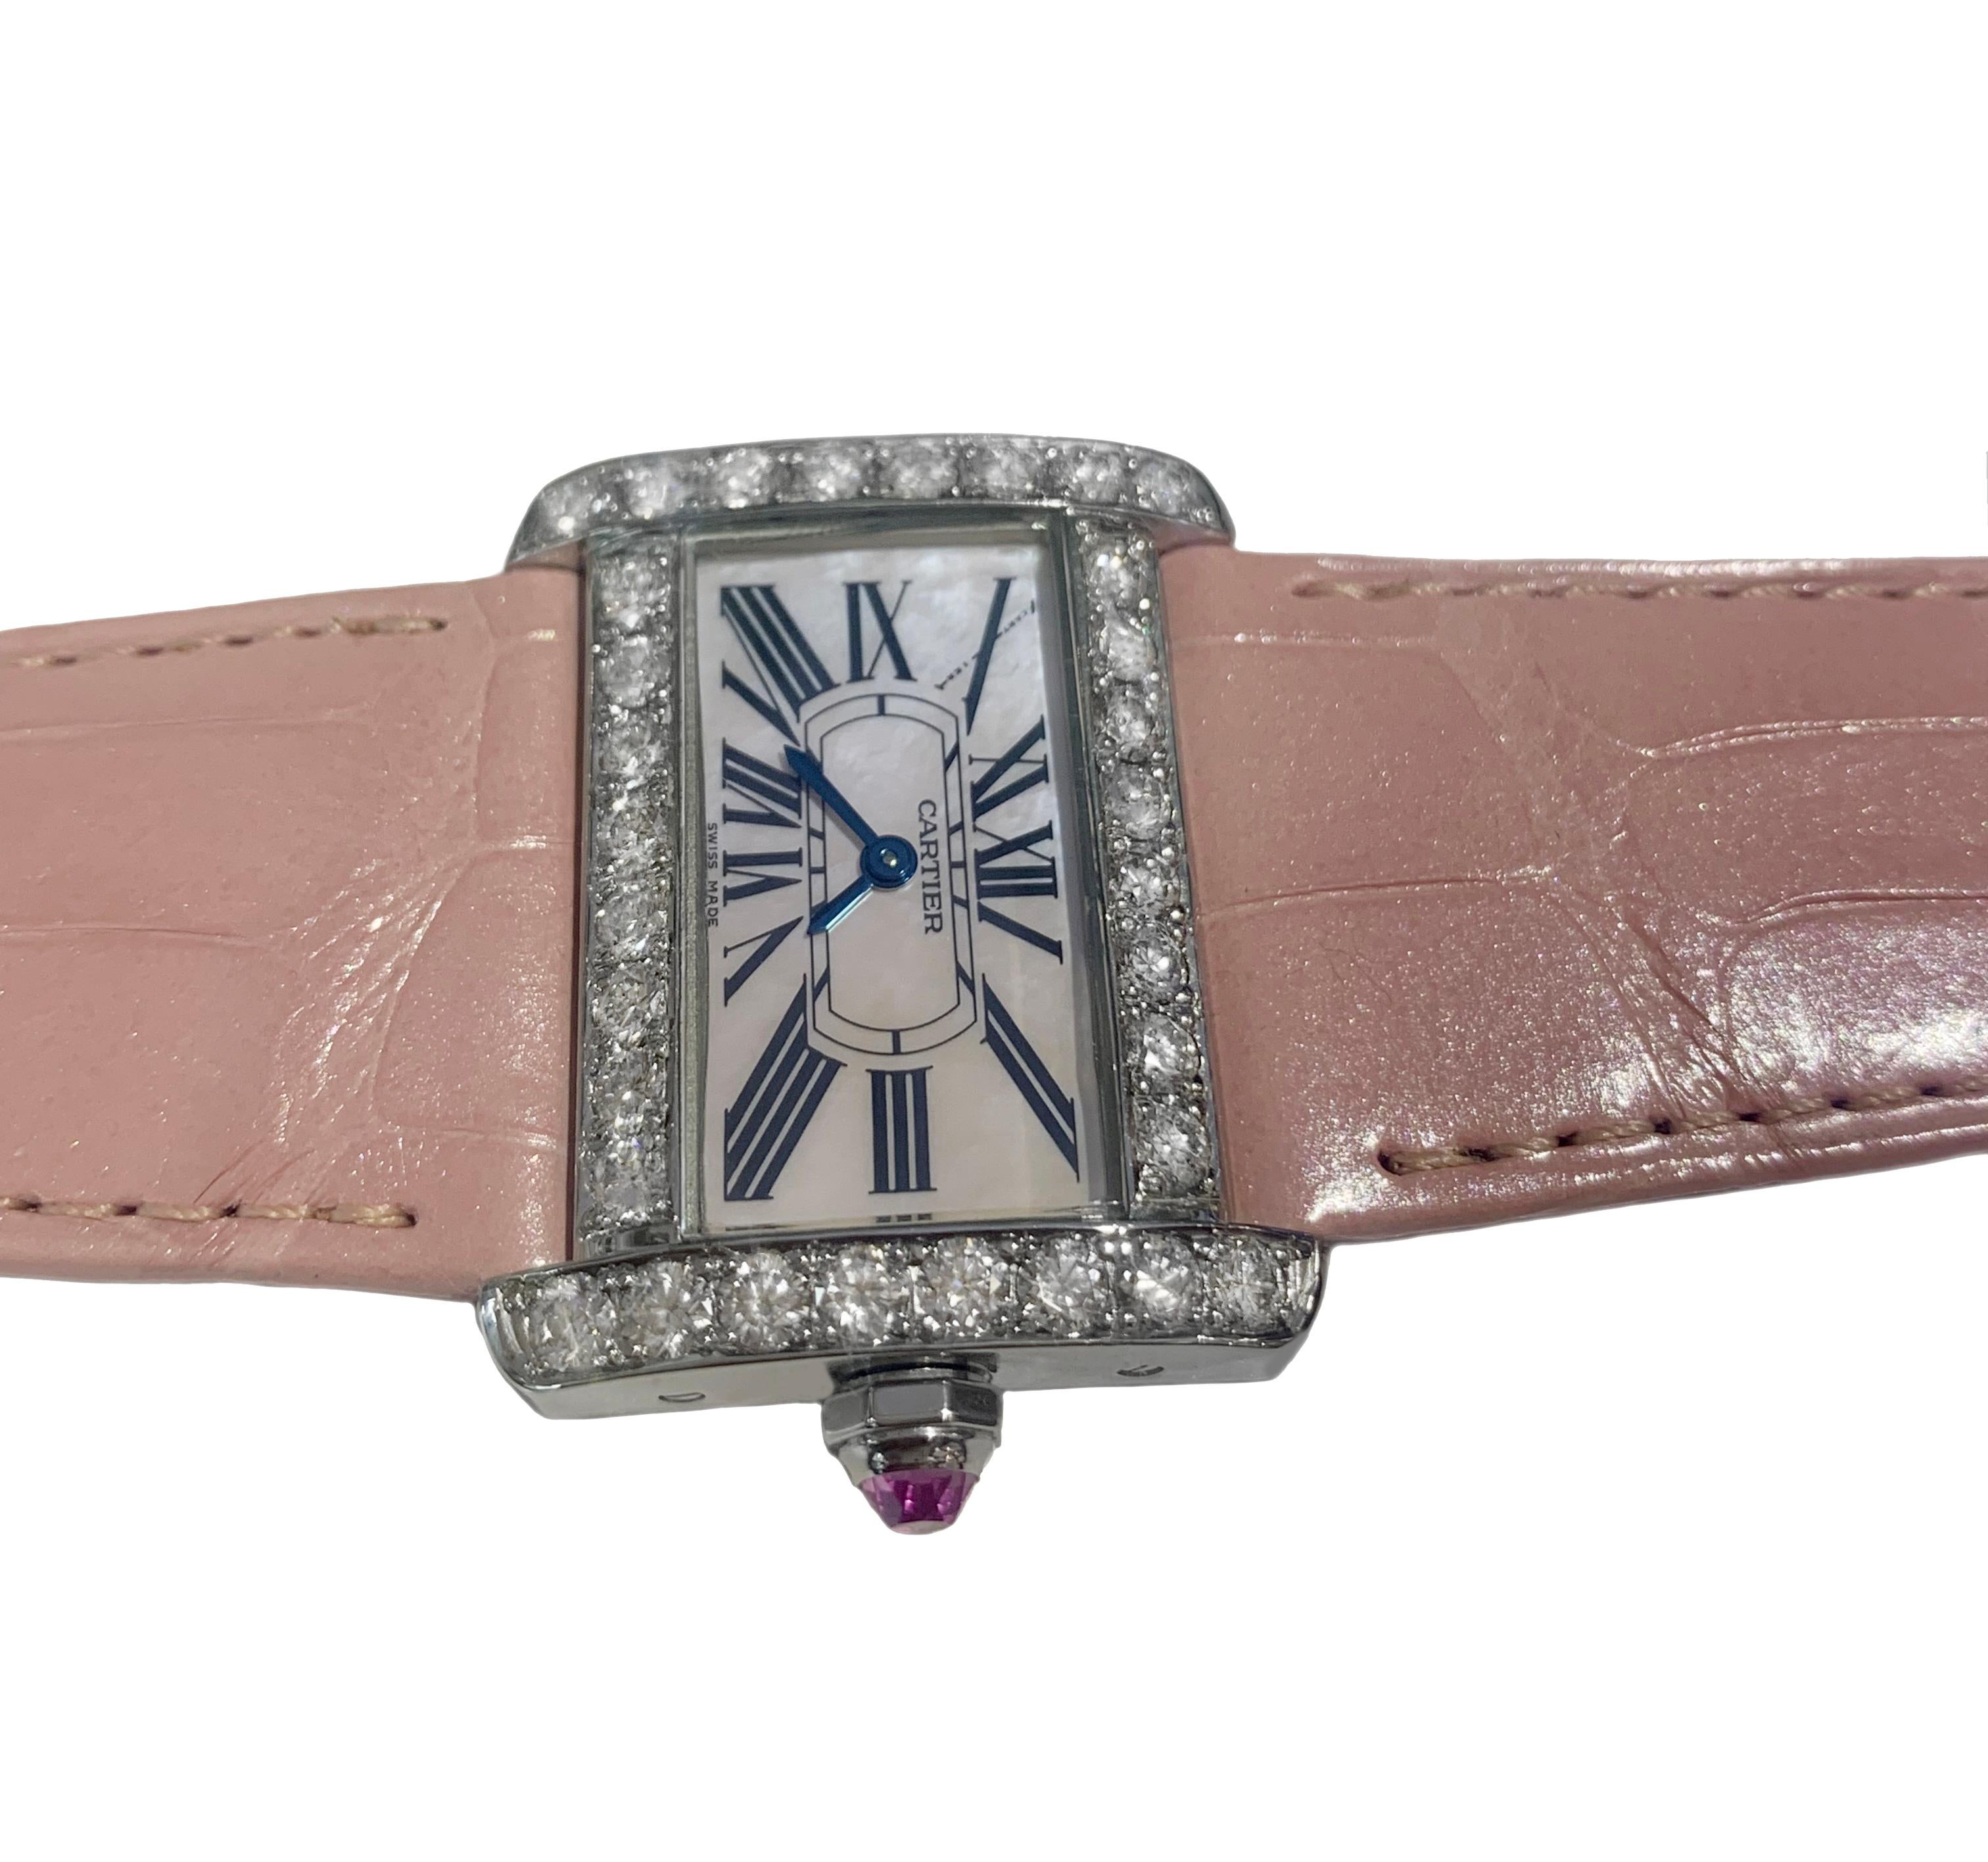 -Mint condition
-Case size: 25x31mm
-Stainless steel
-Movement: Quartz
-Roman numeral hour markers
-Pink leather strap
-Aftermarket Diamond Bezel: 2.6ct, E-F color, VS1 clarity
-Comes with Box, no papers